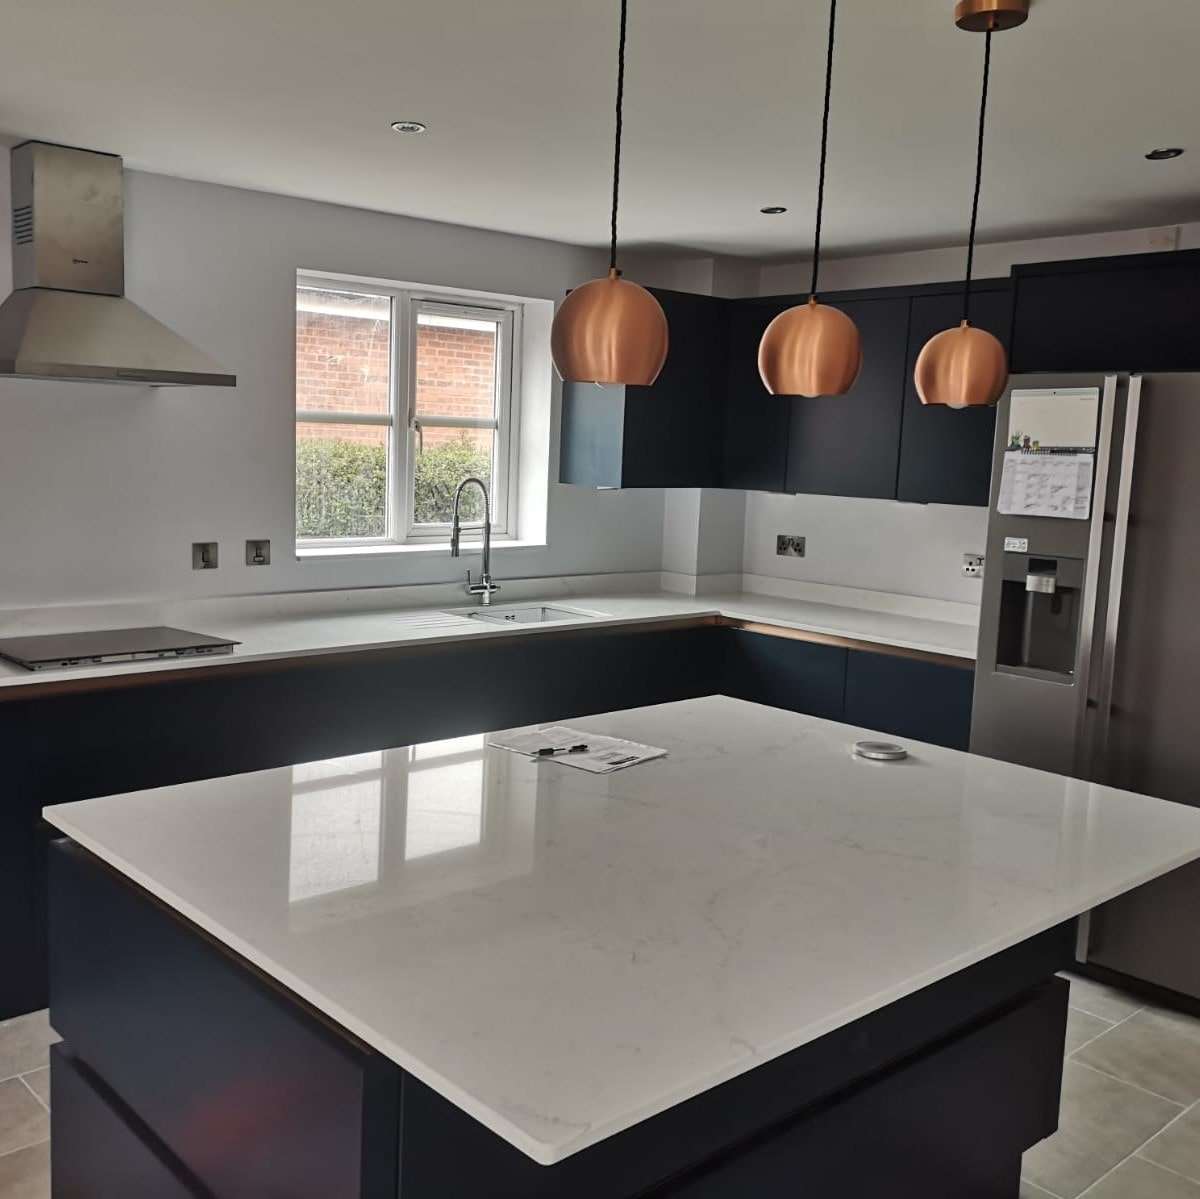 Fugen Avalanche soft white Quartz kitchen worktops and island with faint veining in a grey colour.